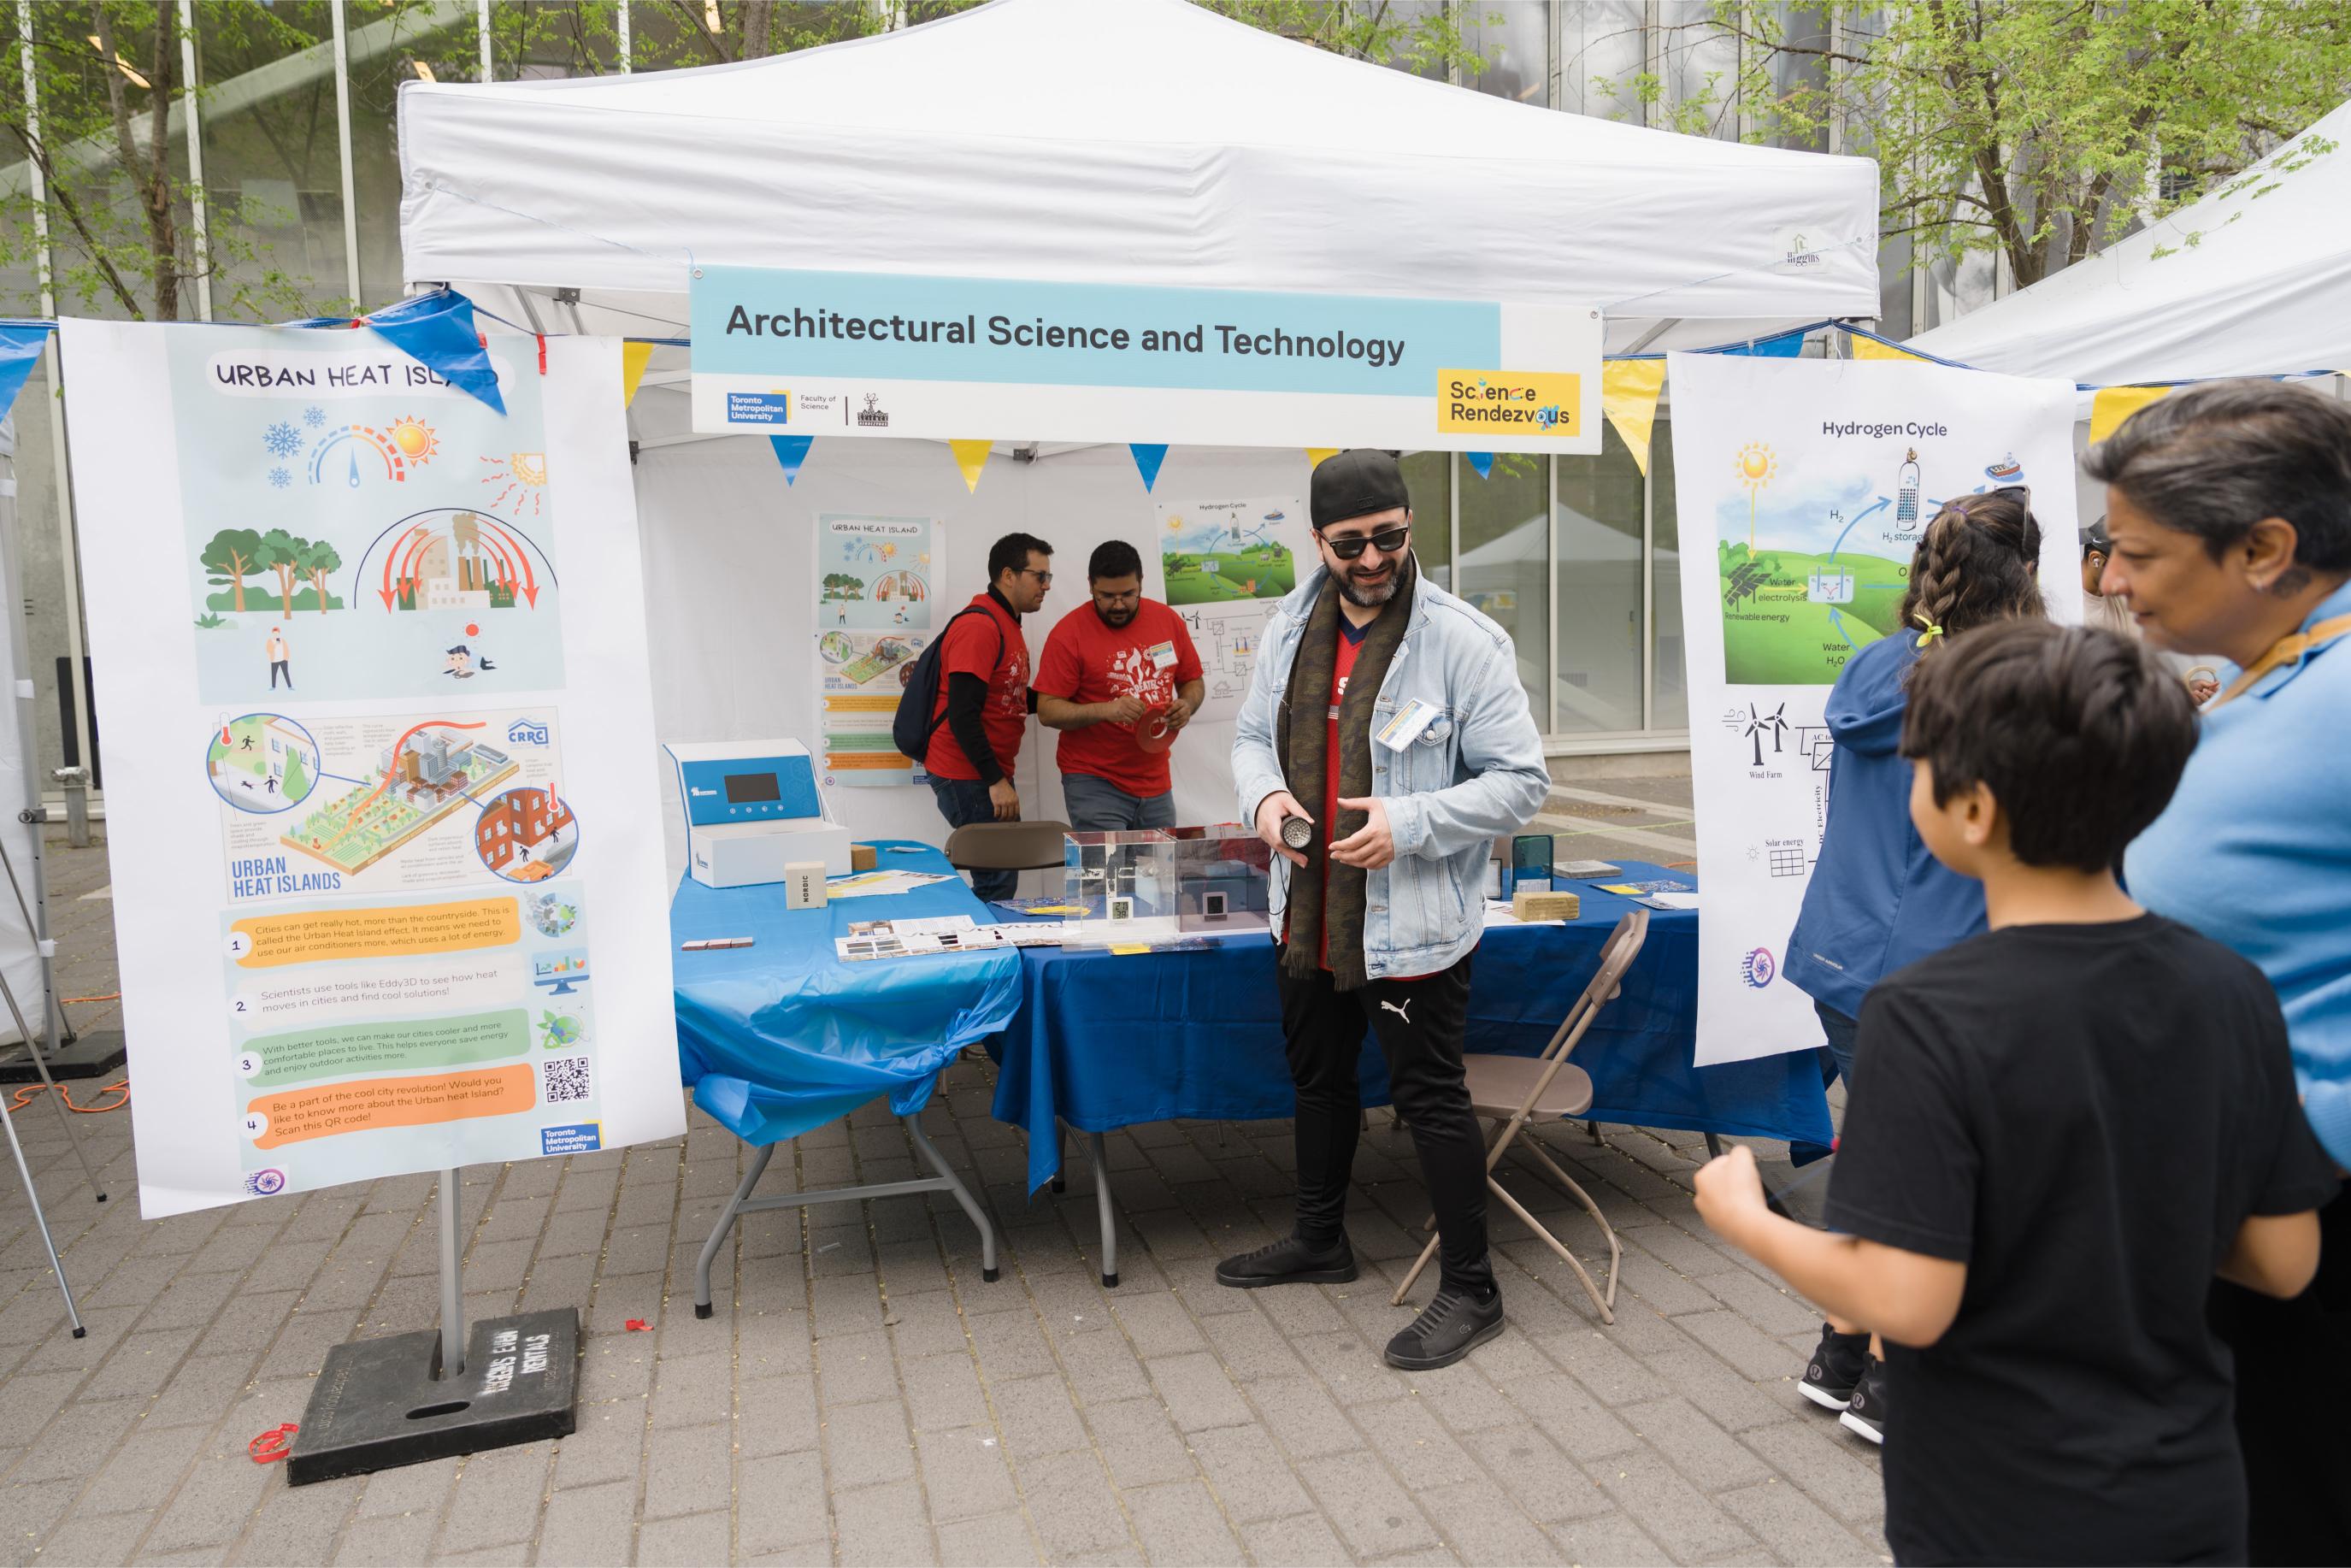 Volunteers engaging with participants at the Architectural Science and Technology Booth.